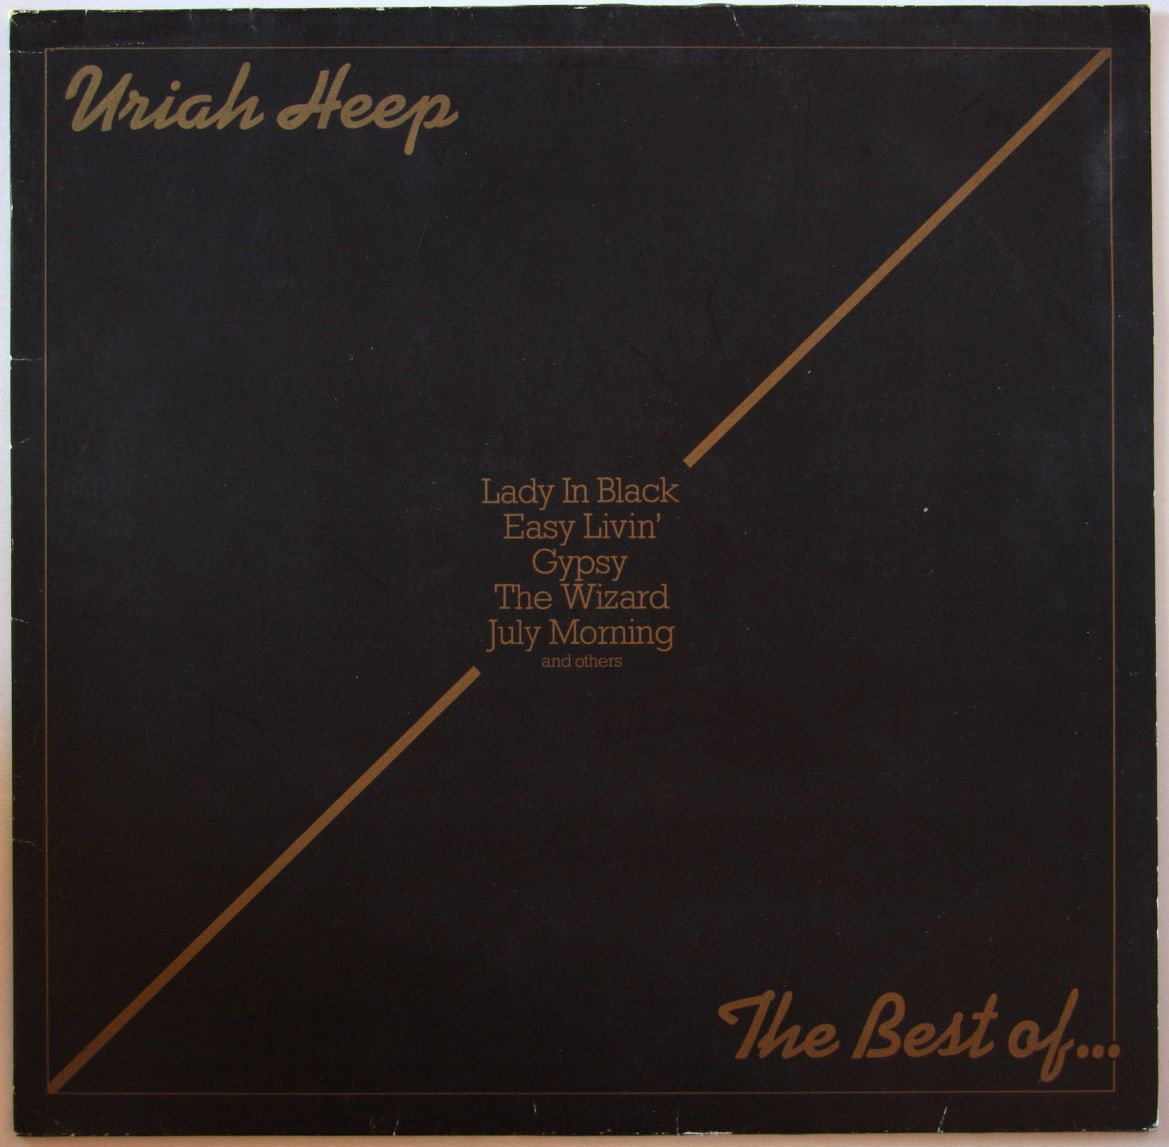 Uriah Heep - The Best Of... cover